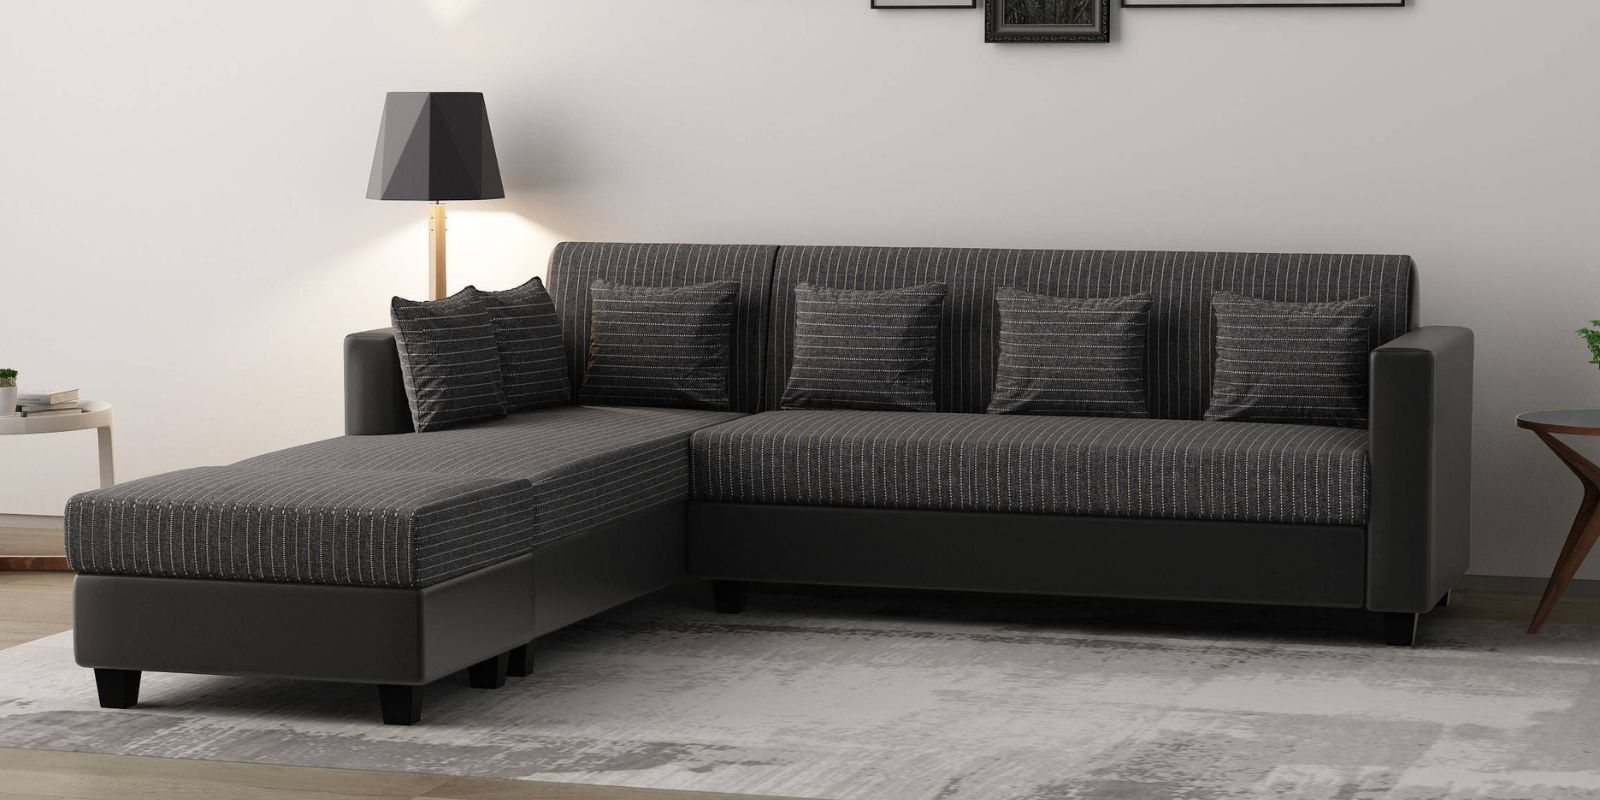 Baley Fabric RHS Sectional Sofa (3 + Lounger) In Lama Black Colour